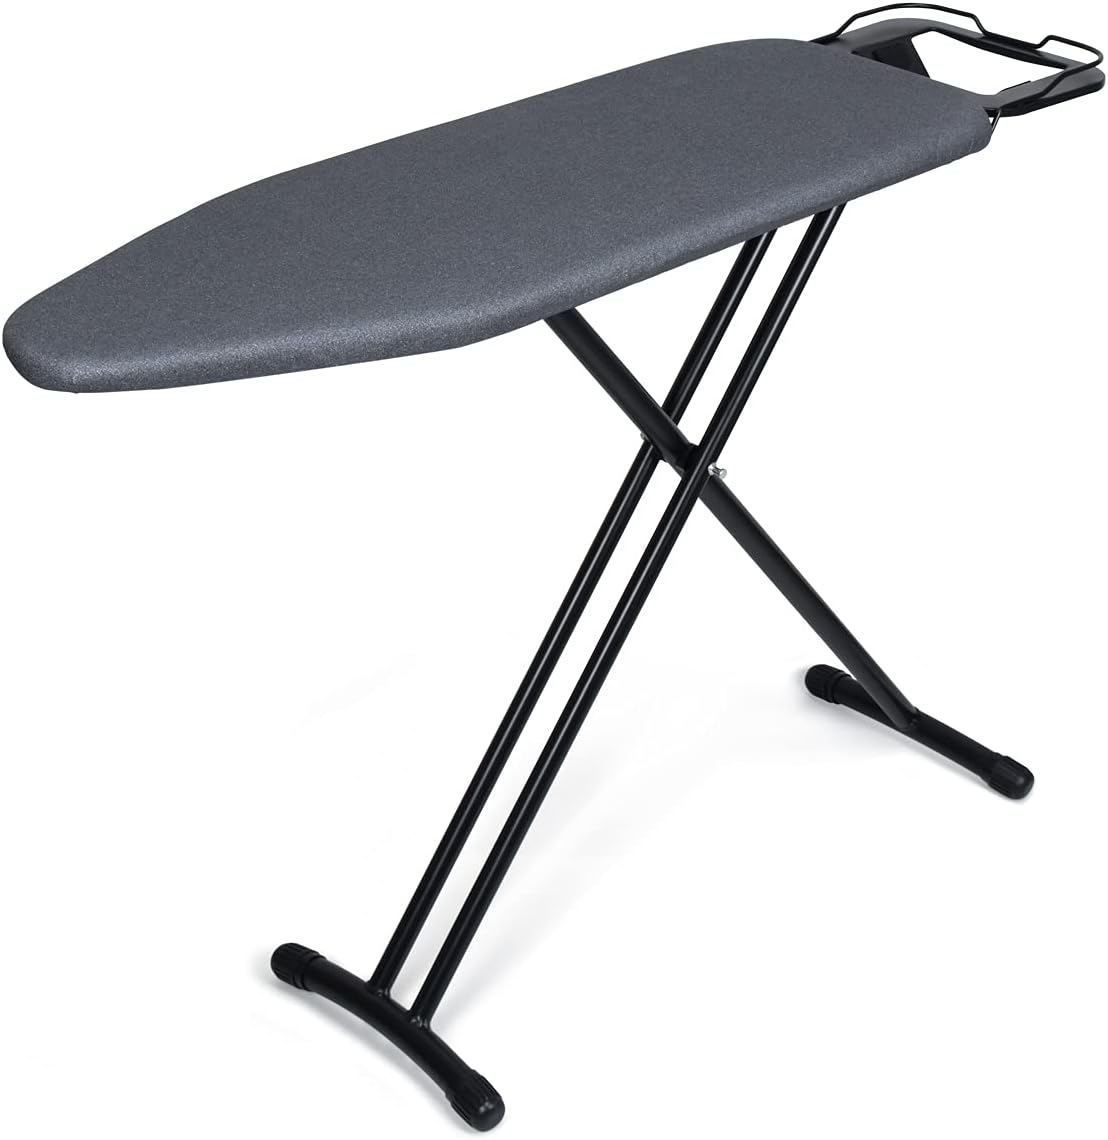 Foldable Ironing Board Table with Iron Stand (36 X 12 Inches)